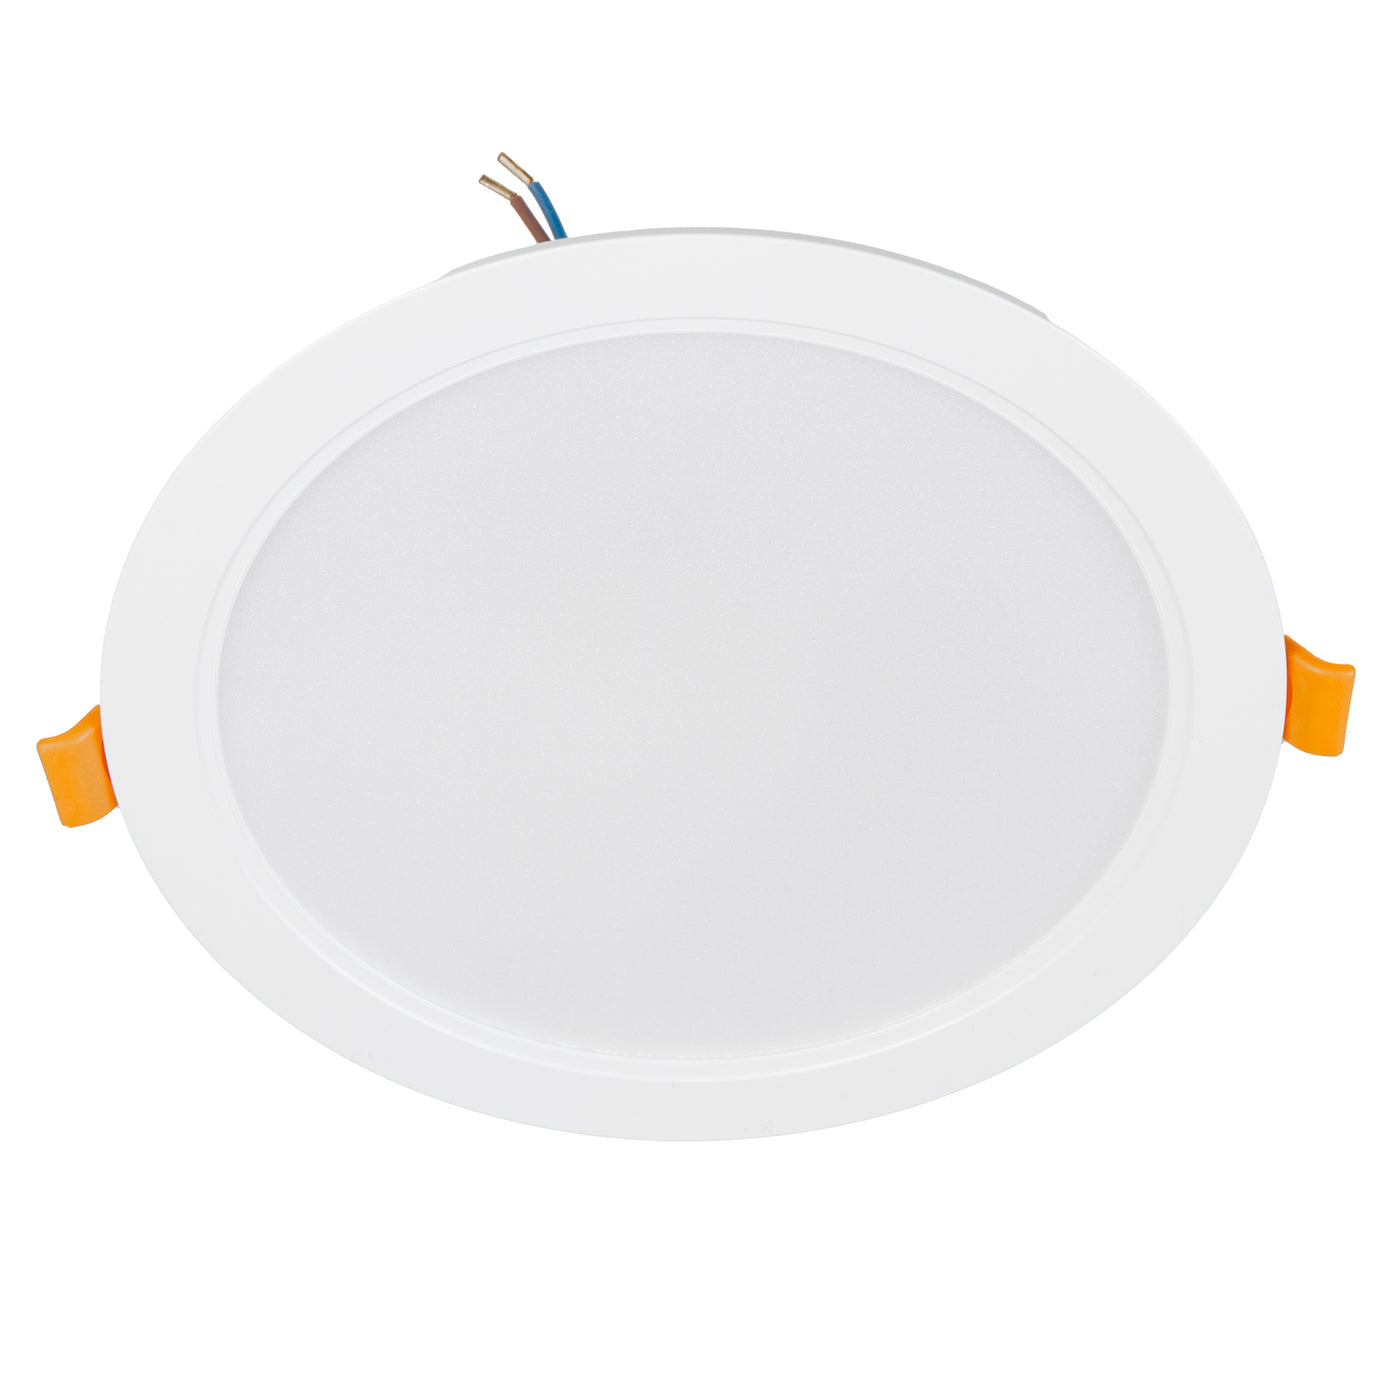 Panel LED sufitowy Maclean, podtynkowy SLIM, 18W, Neutral White 4000K, 170*26mm, 1900 lm, MCE372 R